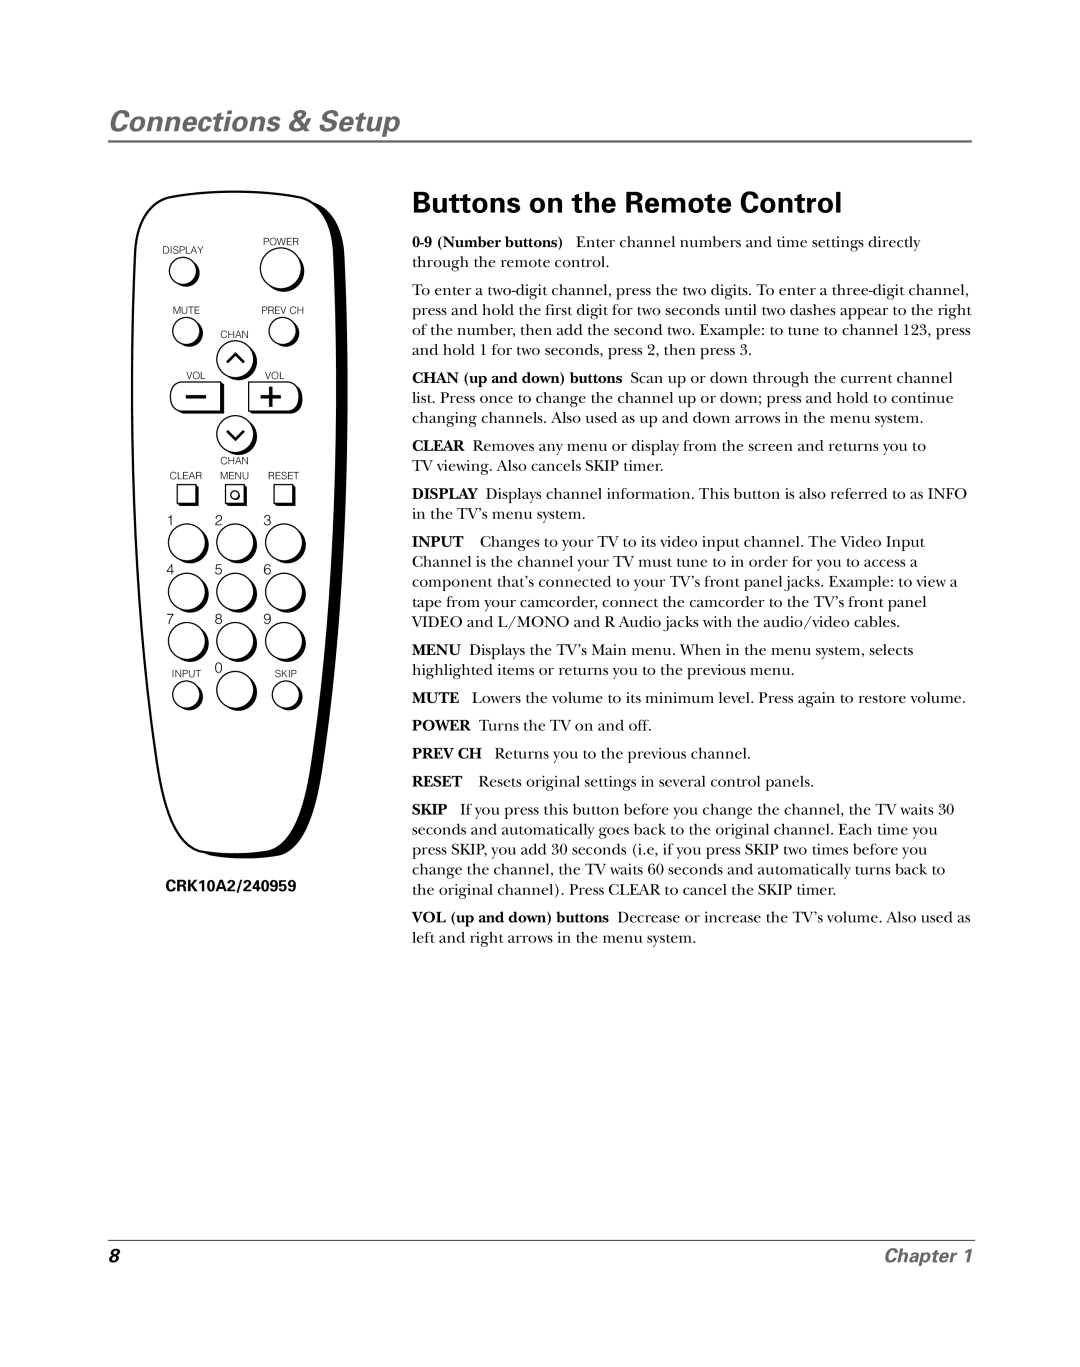 RCA 15956220 manual Buttons on the Remote Control, Connections & Setup, Chapter, CRK10A2/240959 